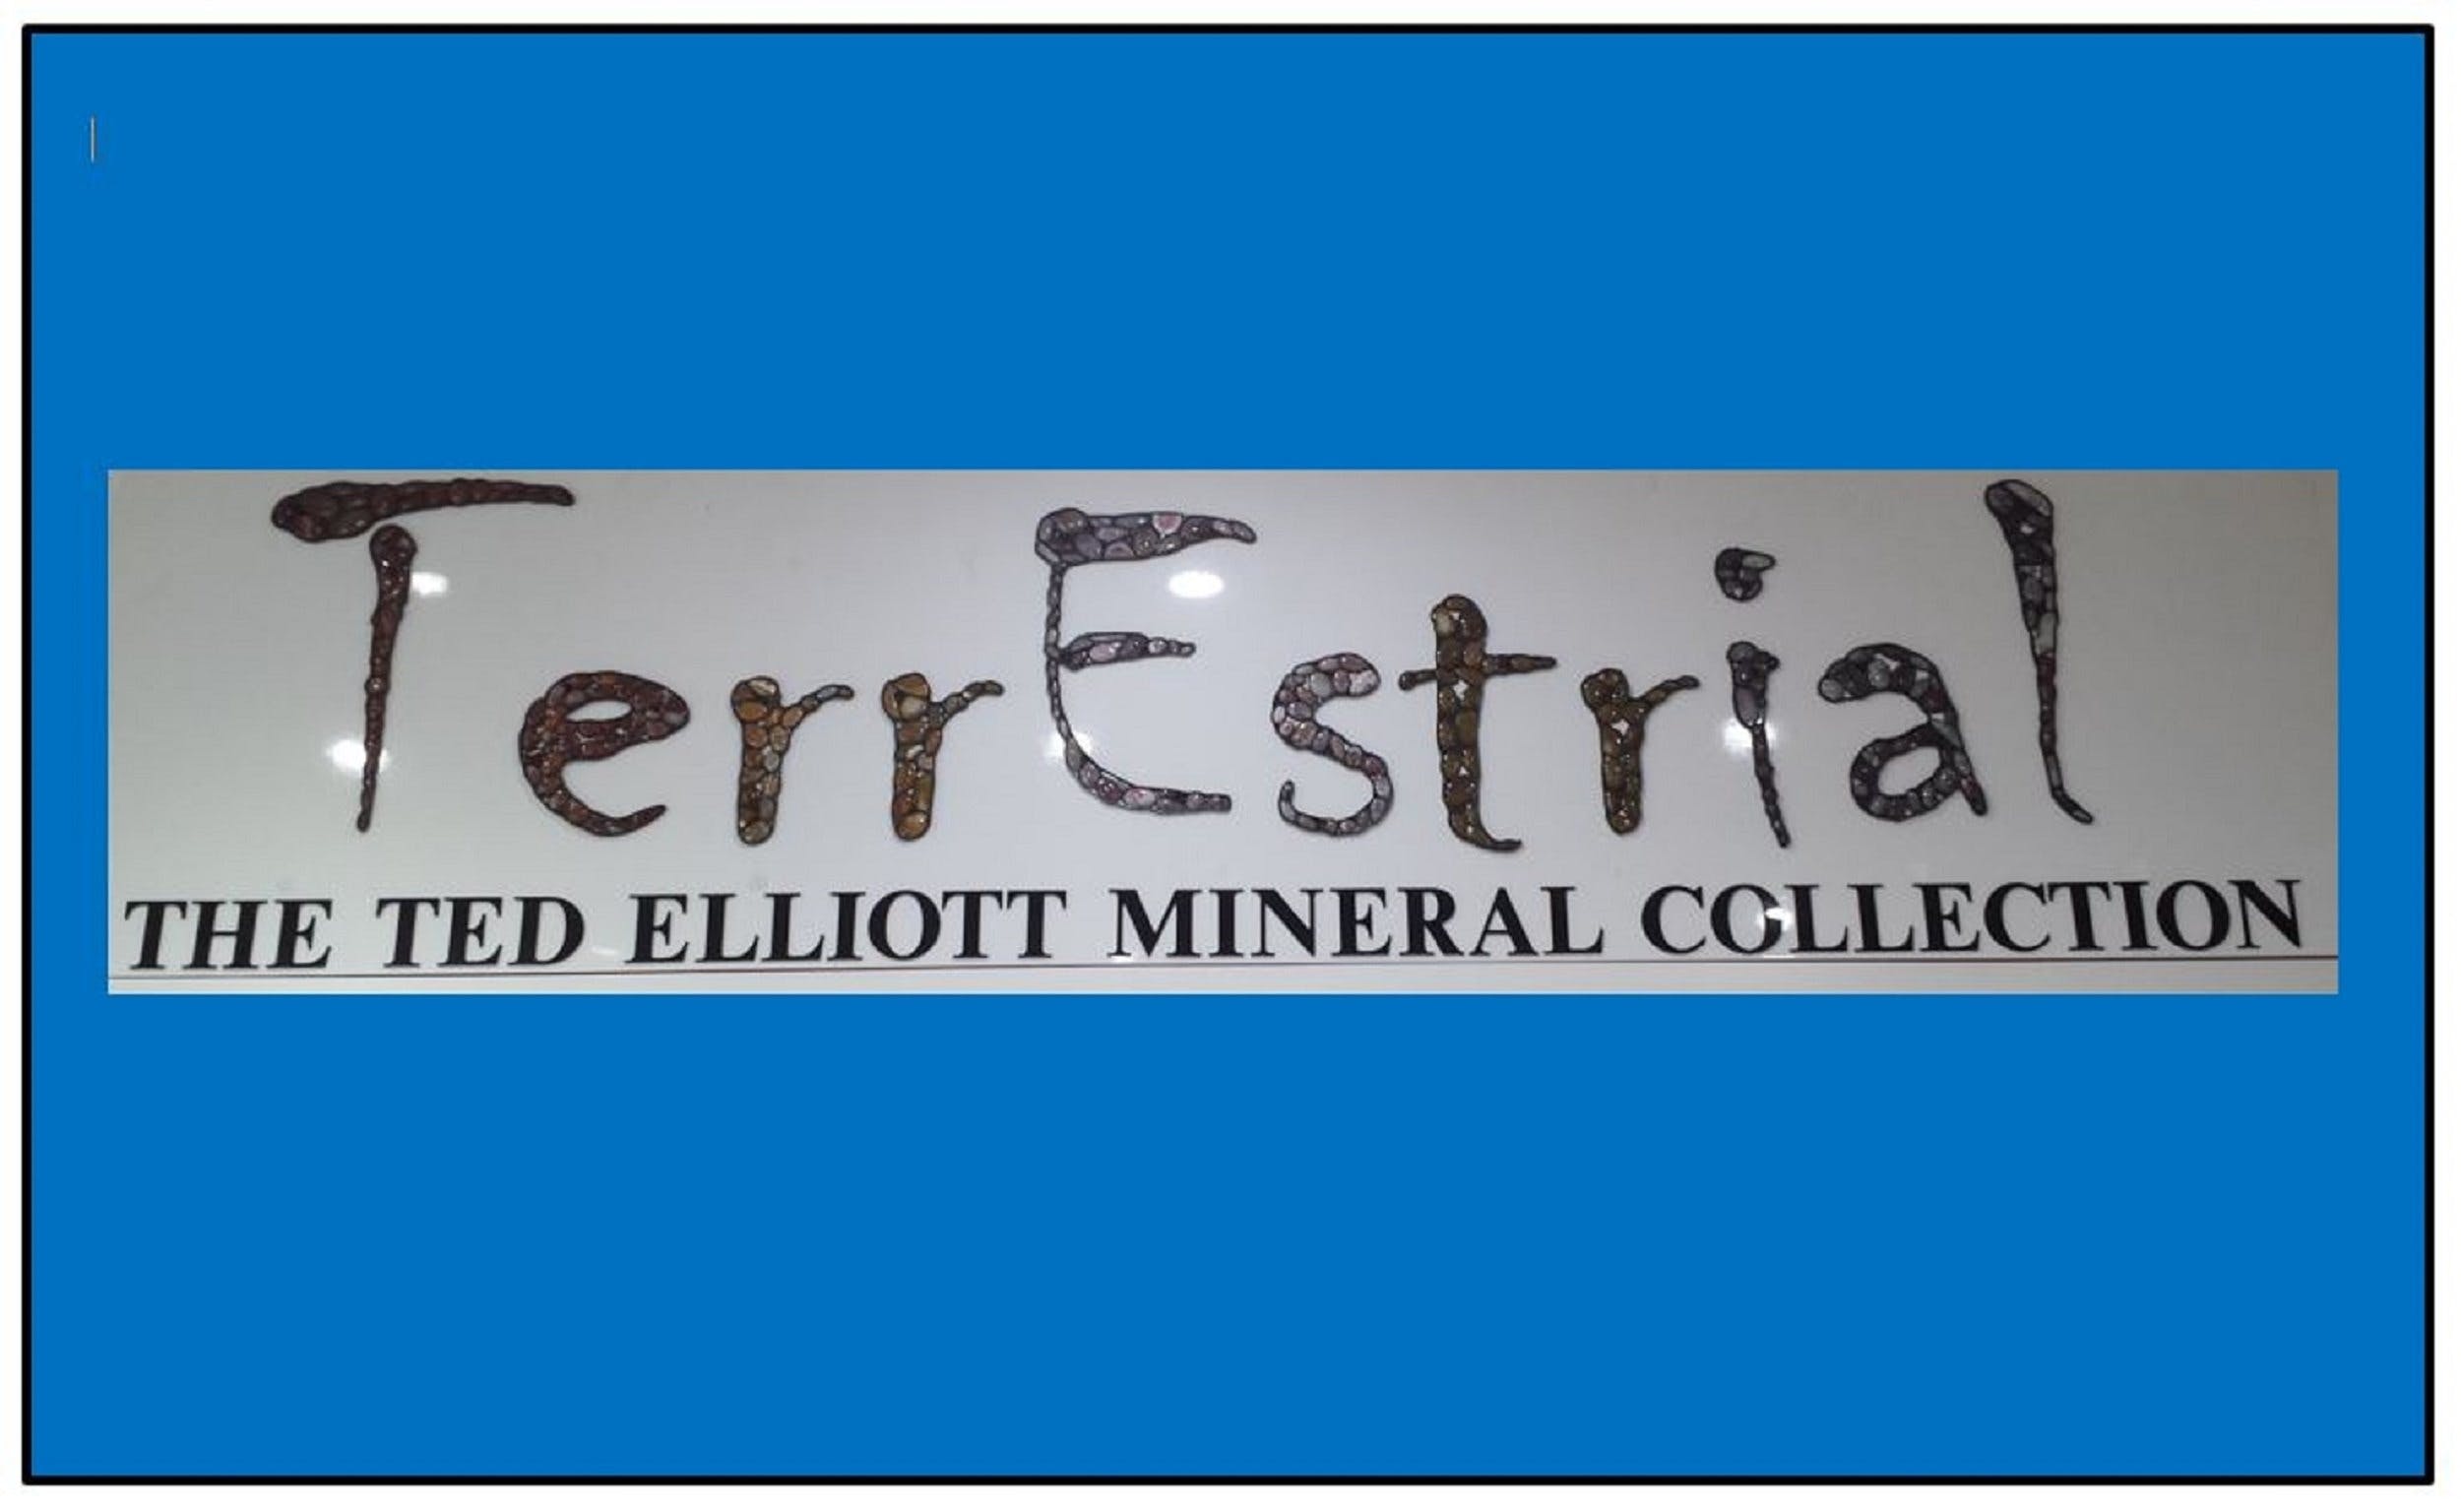 The Ted Elliott Mineral Collection - Carnarvon Accommodation